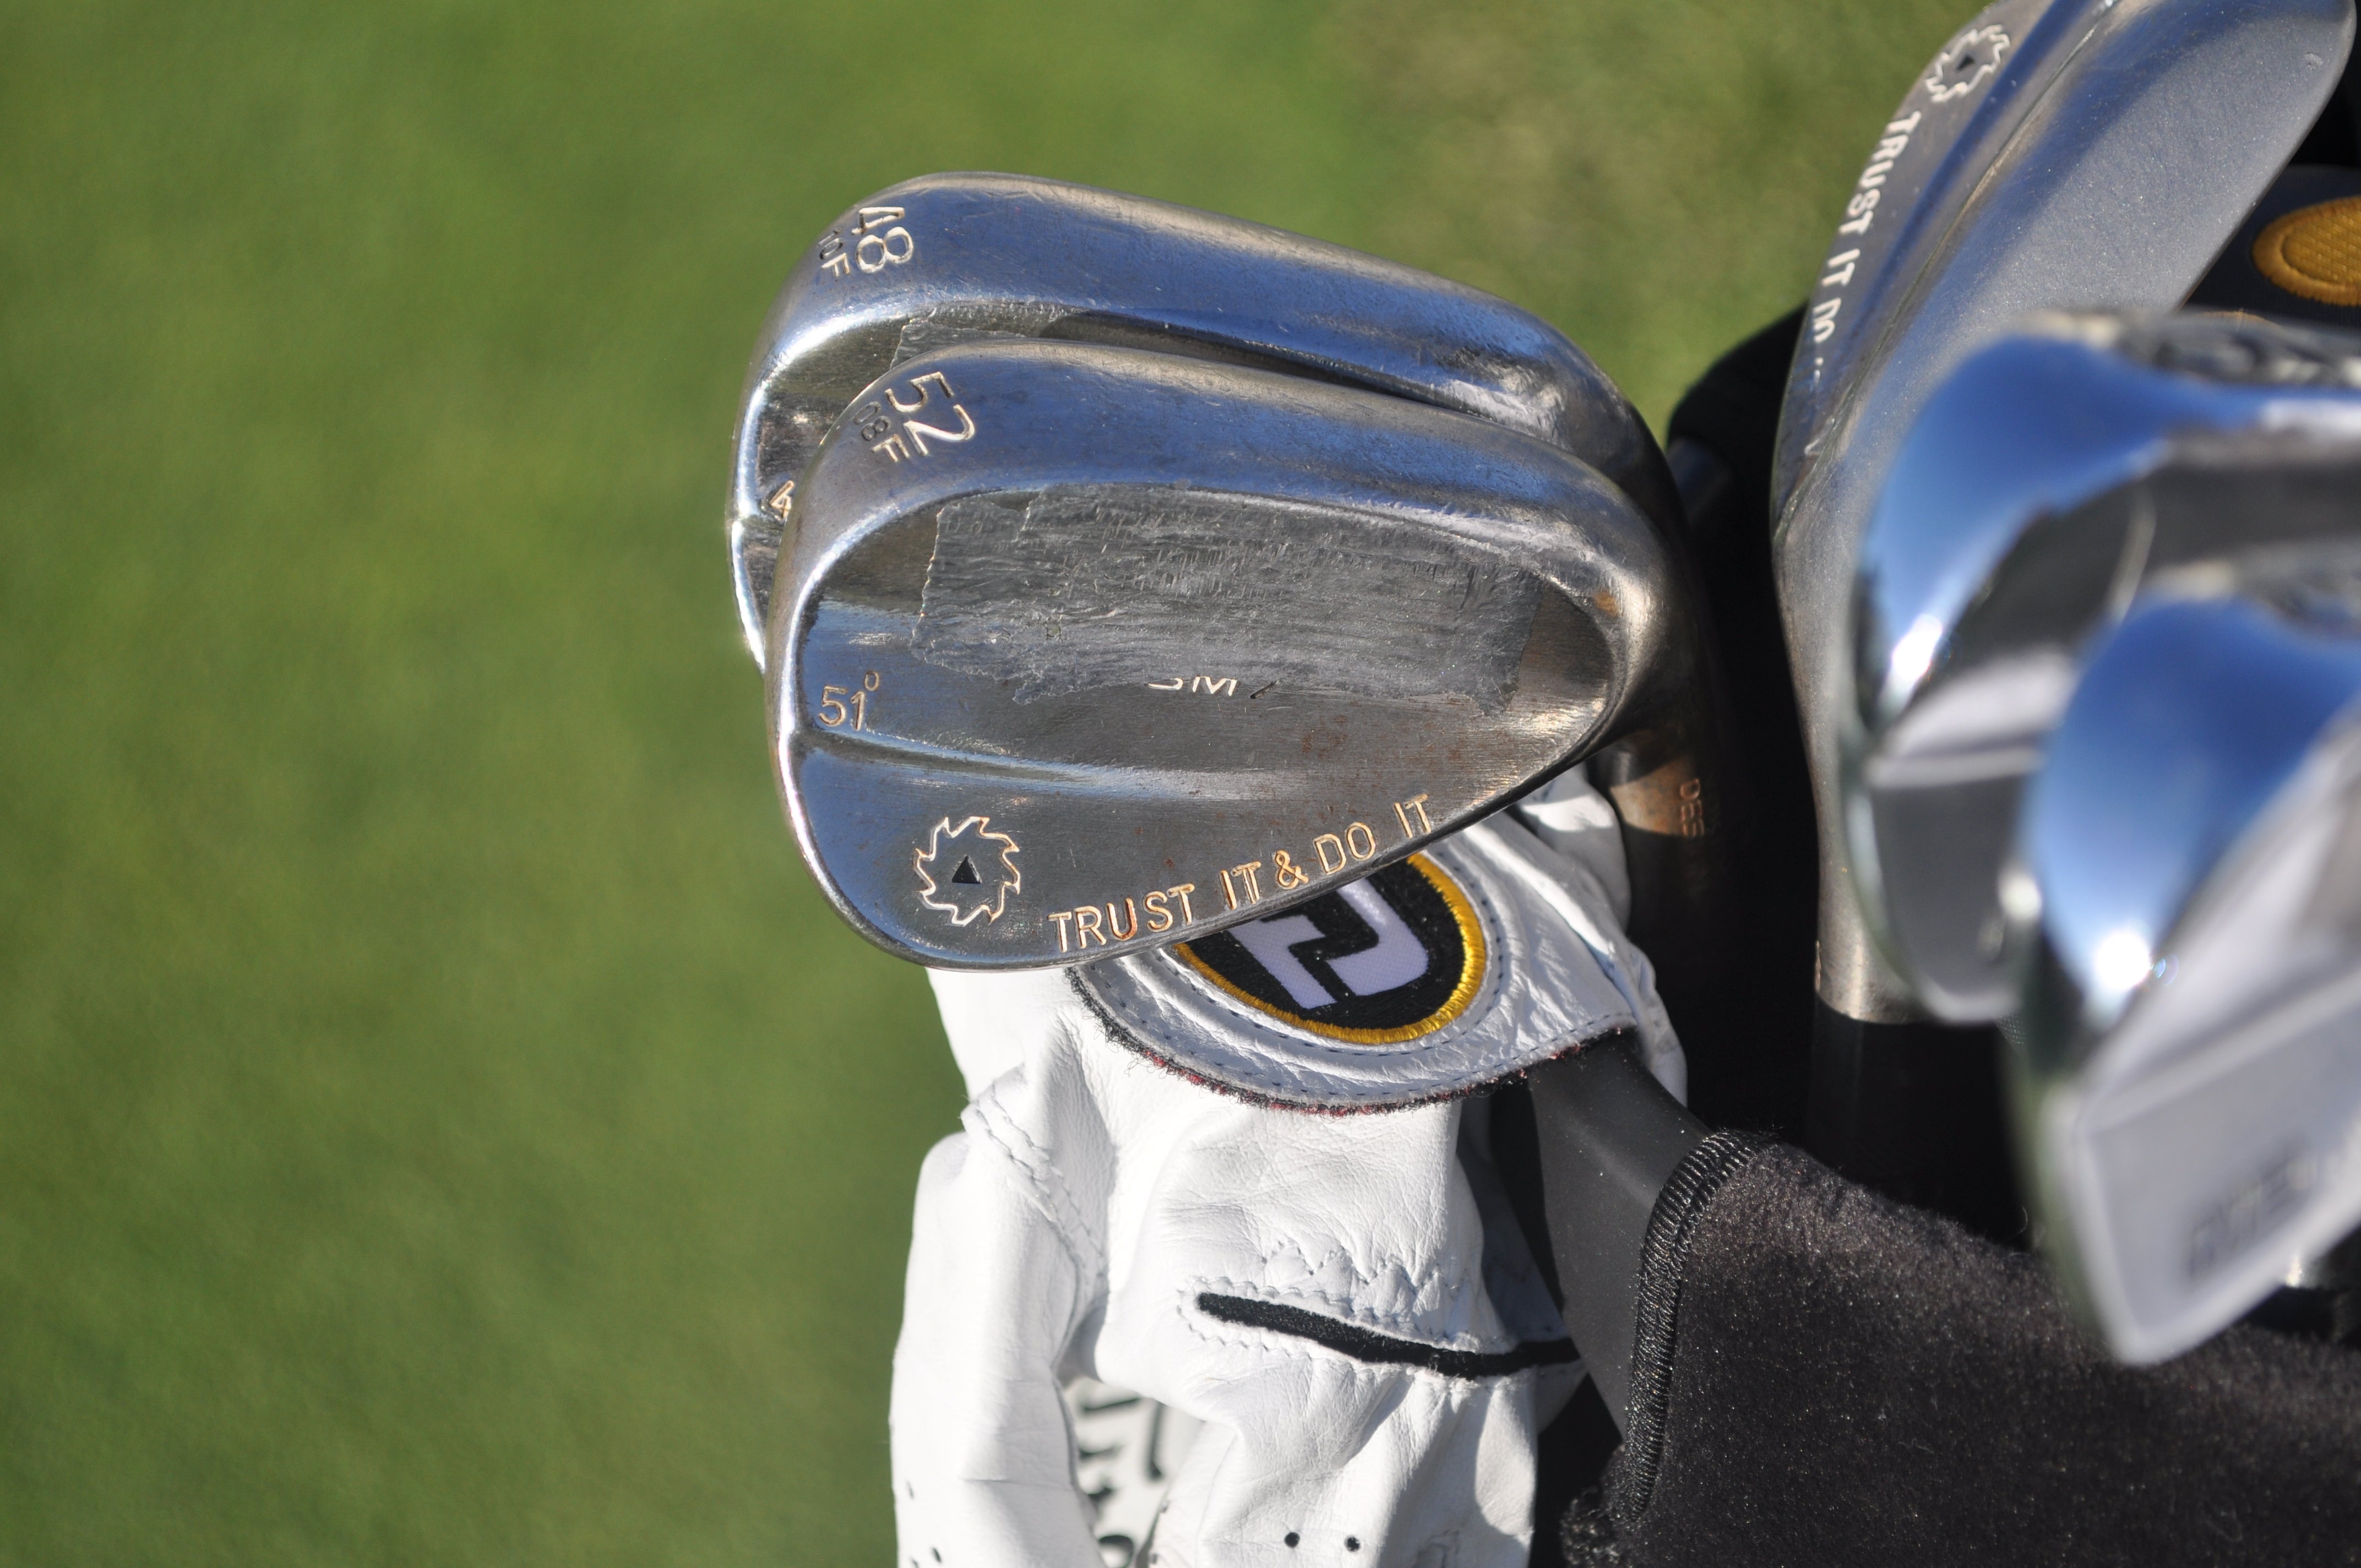 Whee Kim stays positive with the "Trust it Do it" stamping on his Titleist Vokey Design SM7 wedge.